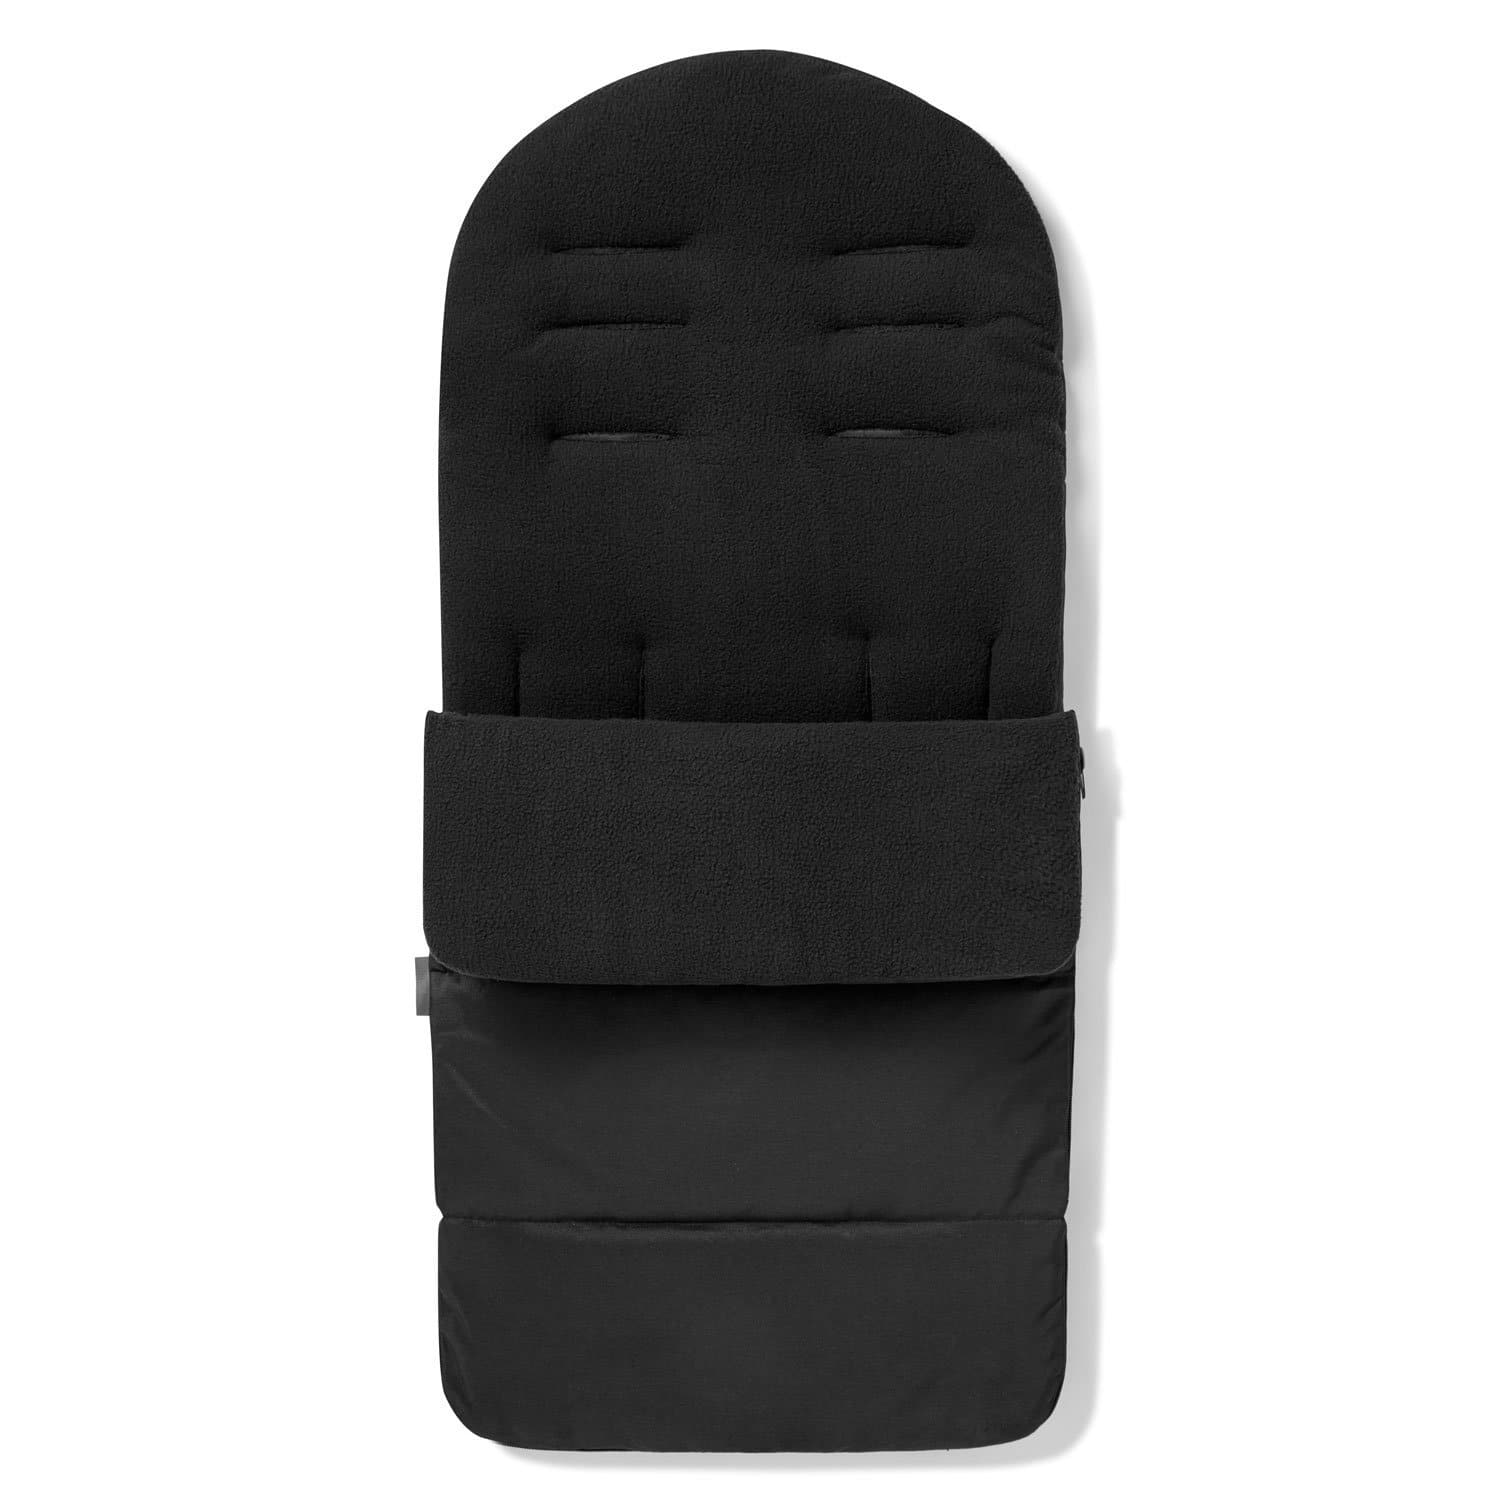 Premium Footmuff / Cosy Toes Compatible with Stokke - Black Jack / Fits All Models | For Your Little One